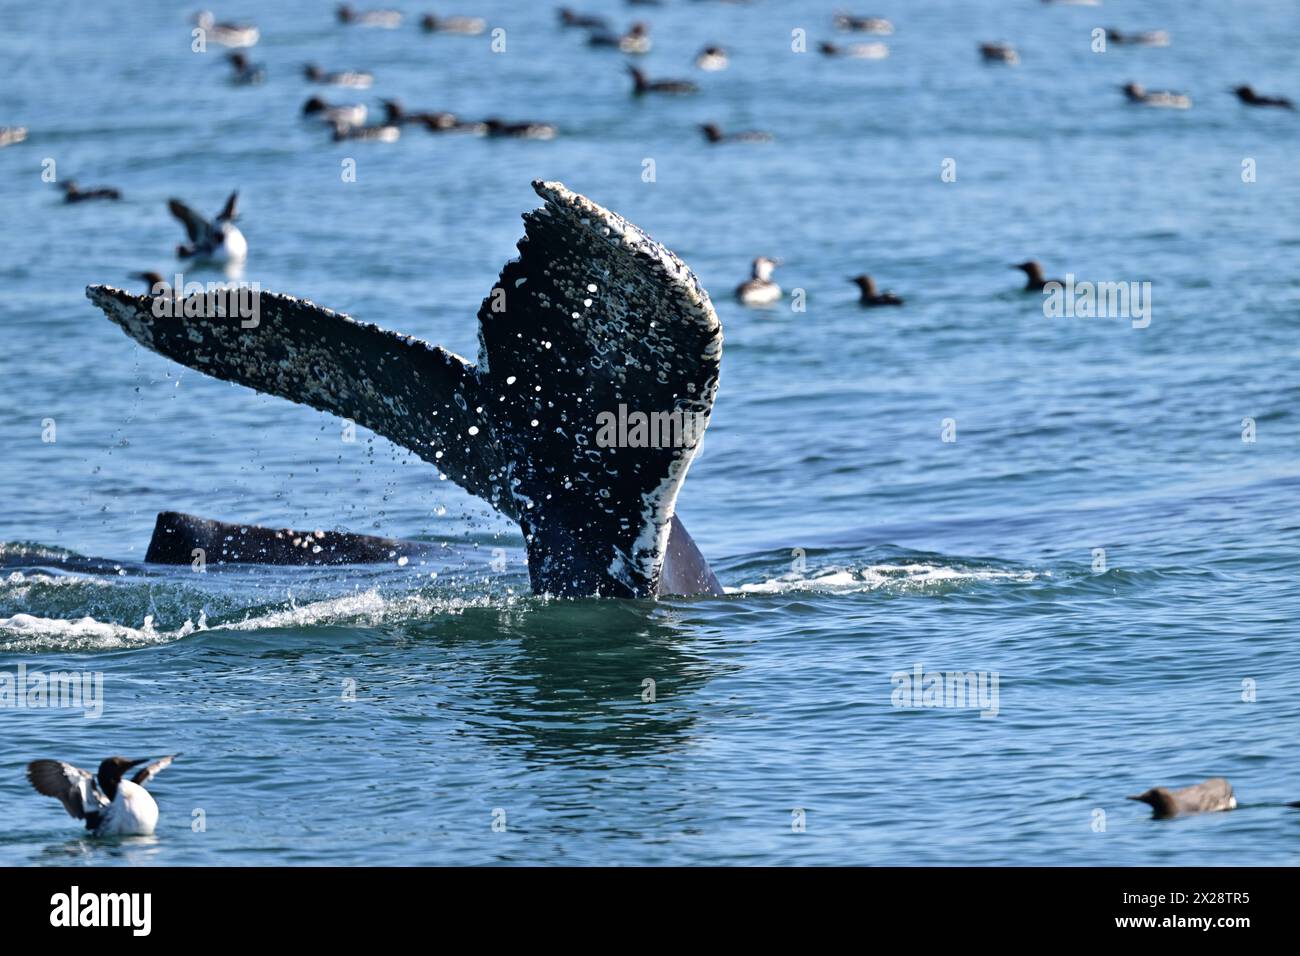 Humpback Whale Flapping Tail Stock Photo